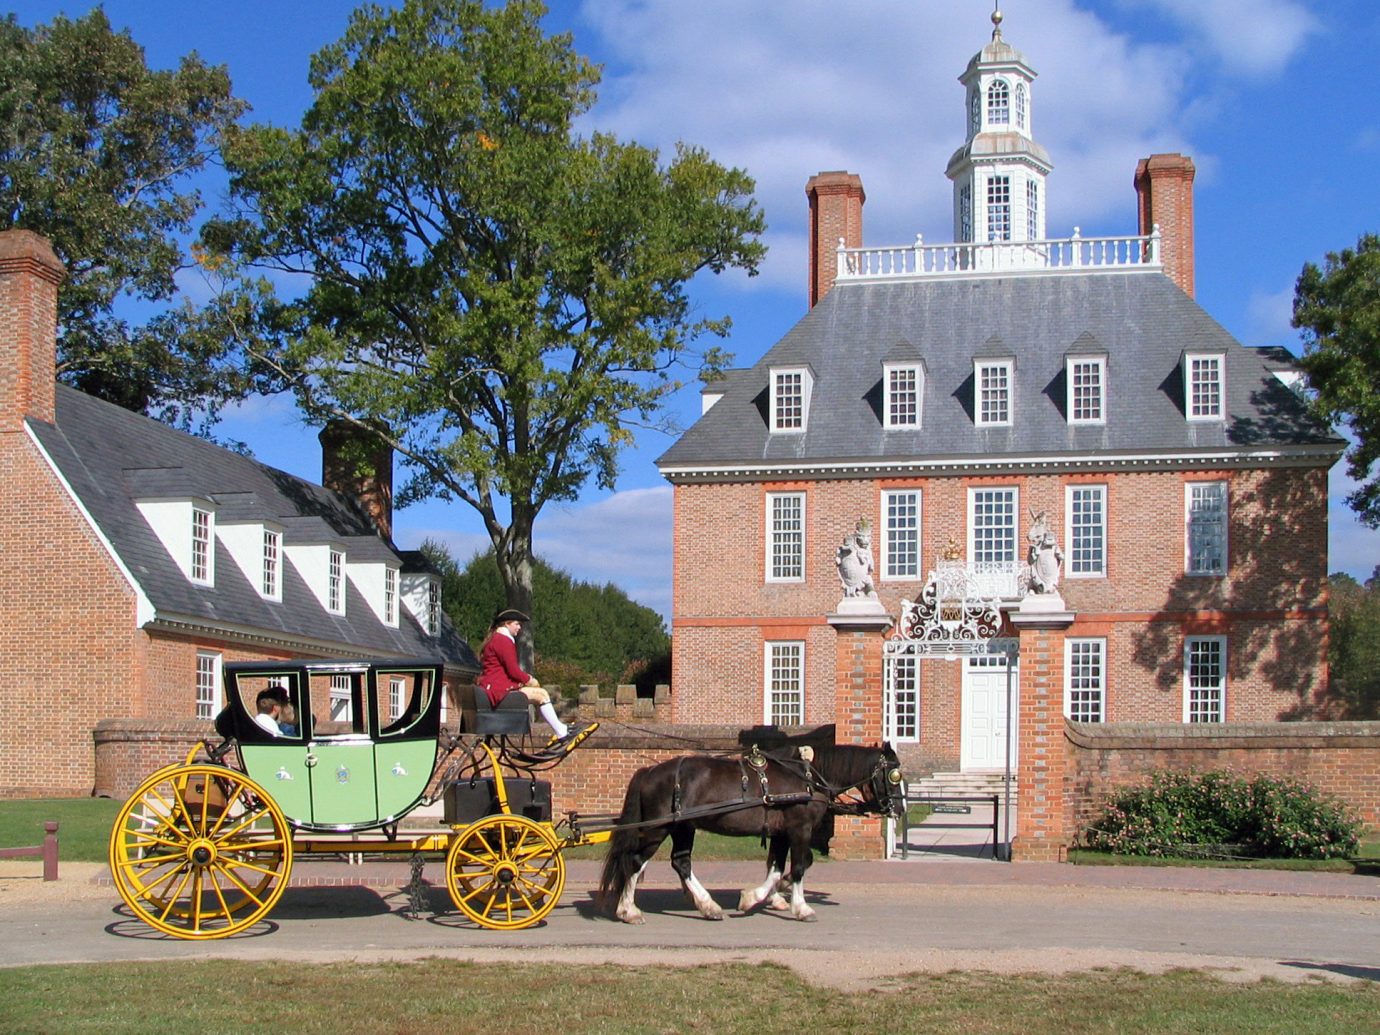 Trip Ideas outdoor tree building road carriage Town landmark street drawn house estate vacation tourism pulling home château place of worship Church horse-drawn vehicle cart